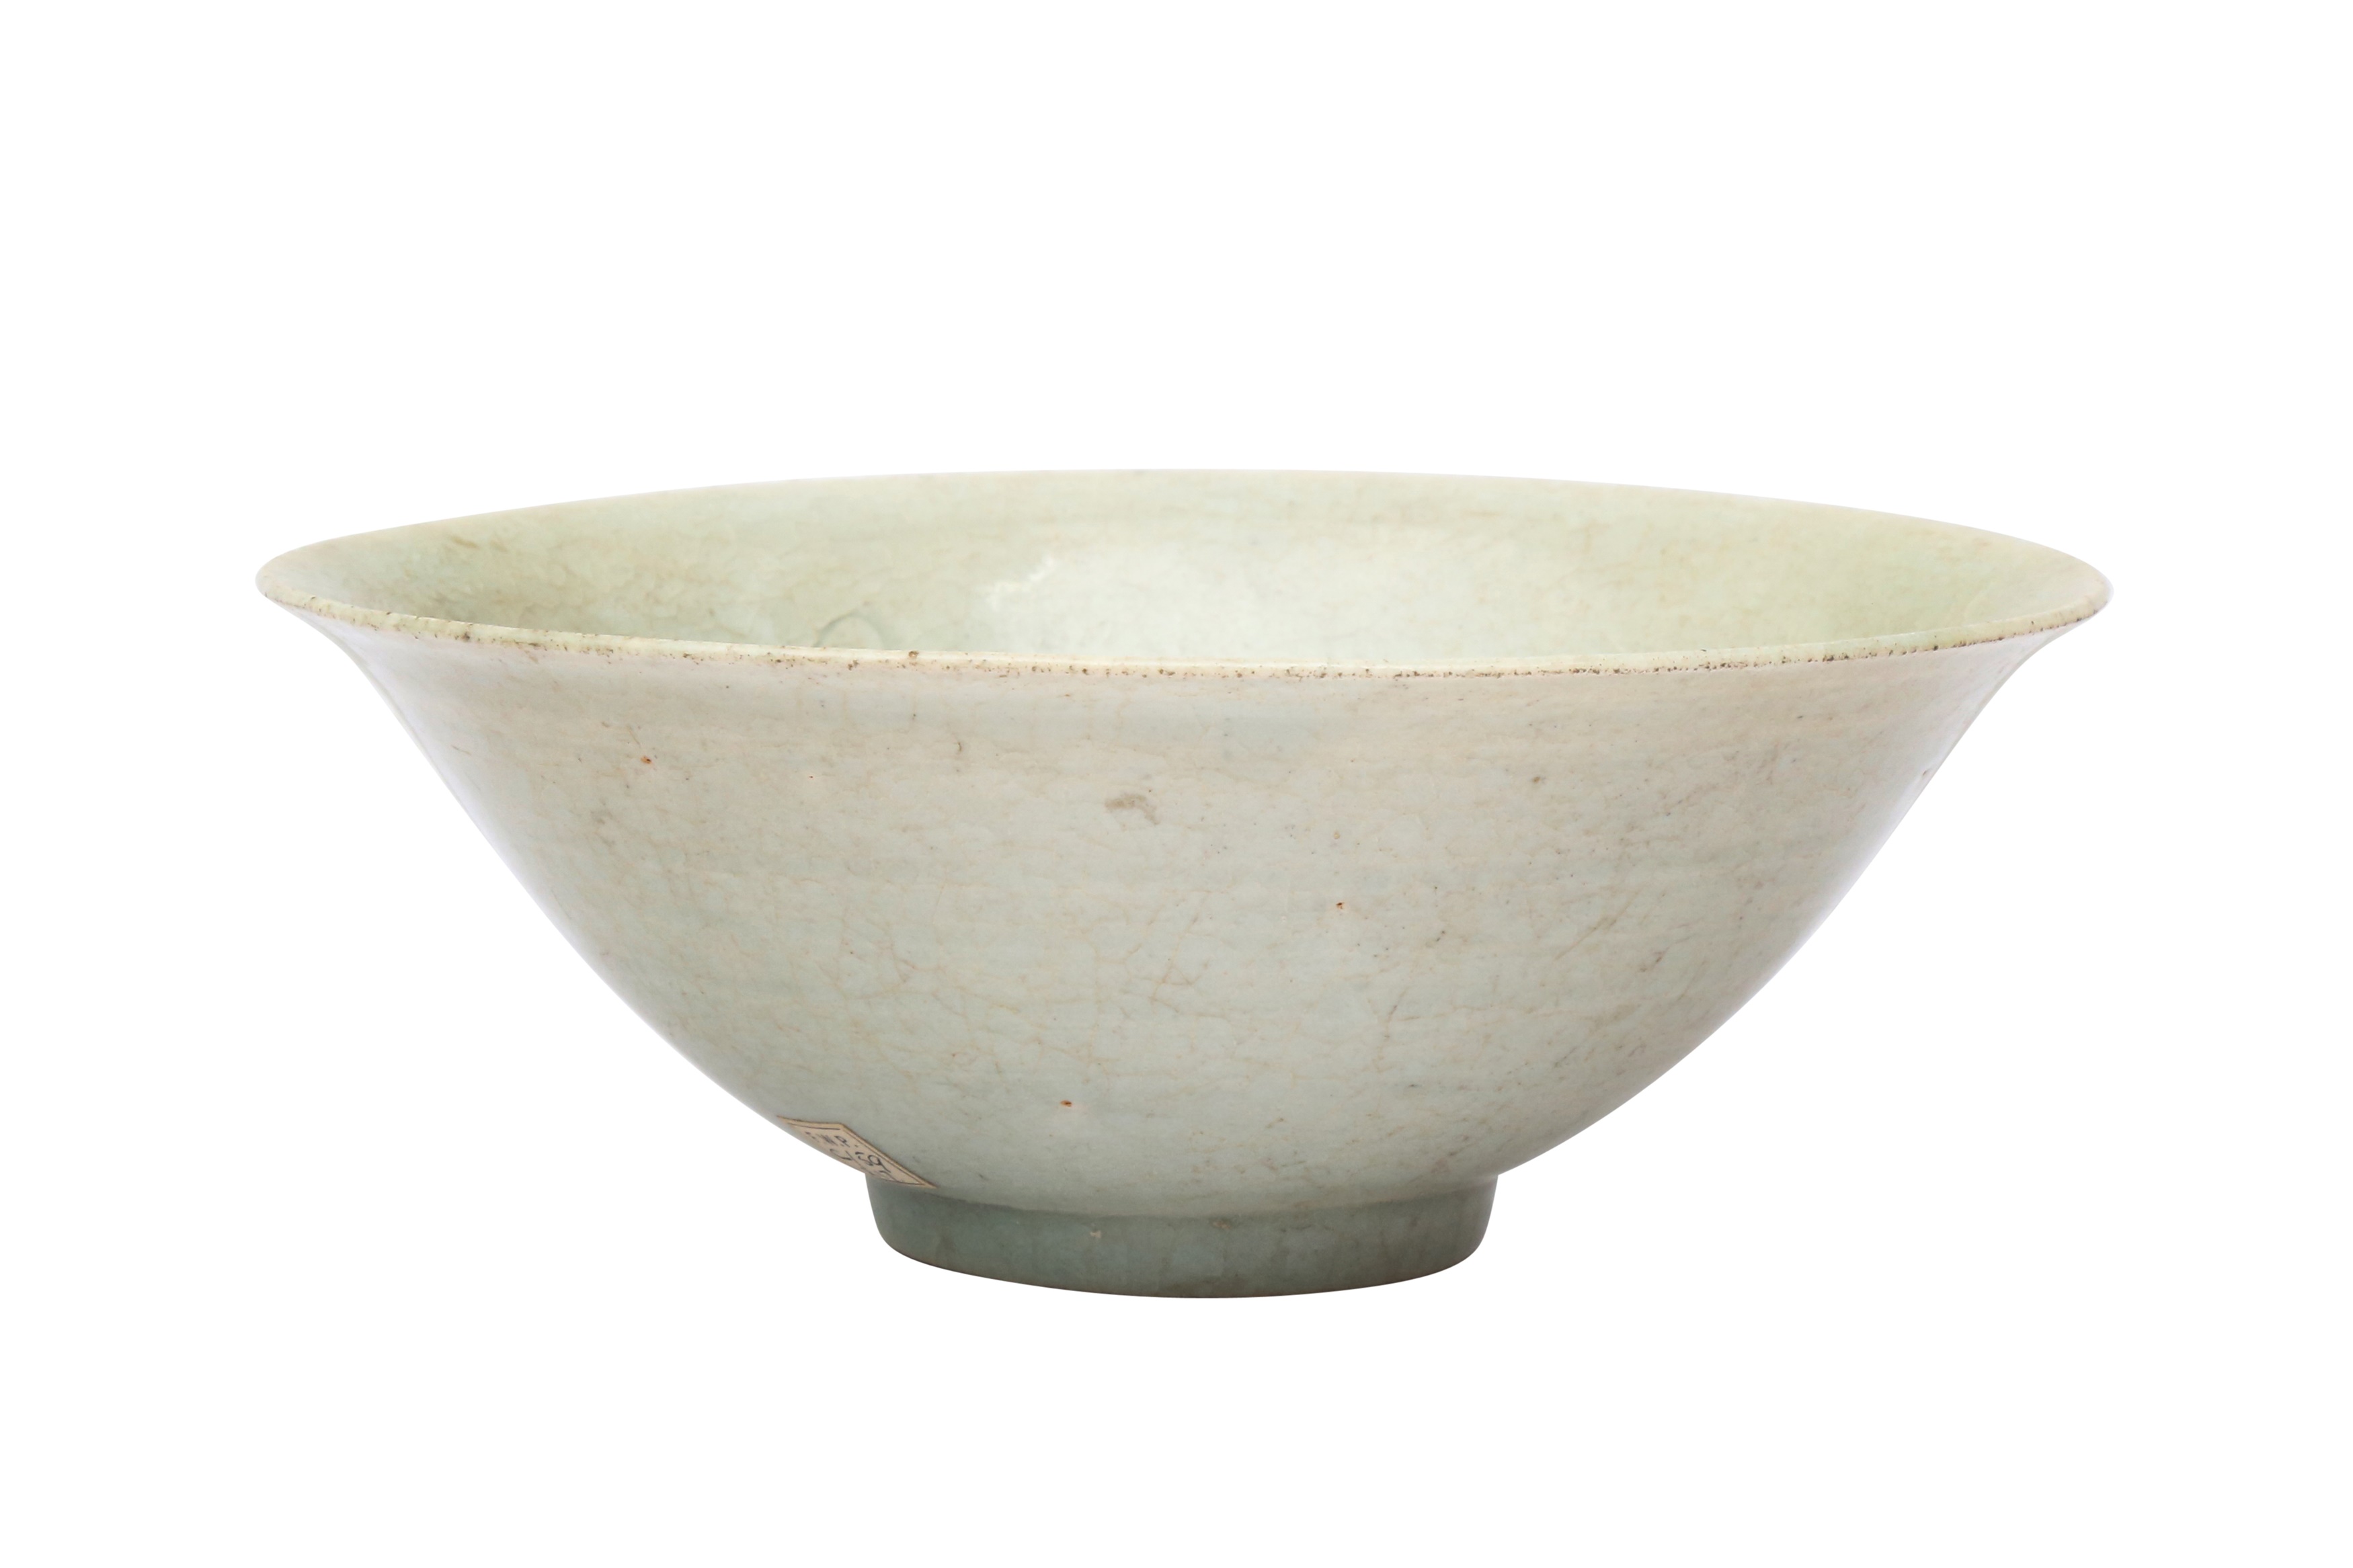 A CHINESE QINGBAI INCISED BOWL 南宋 青白盌 - Image 2 of 3